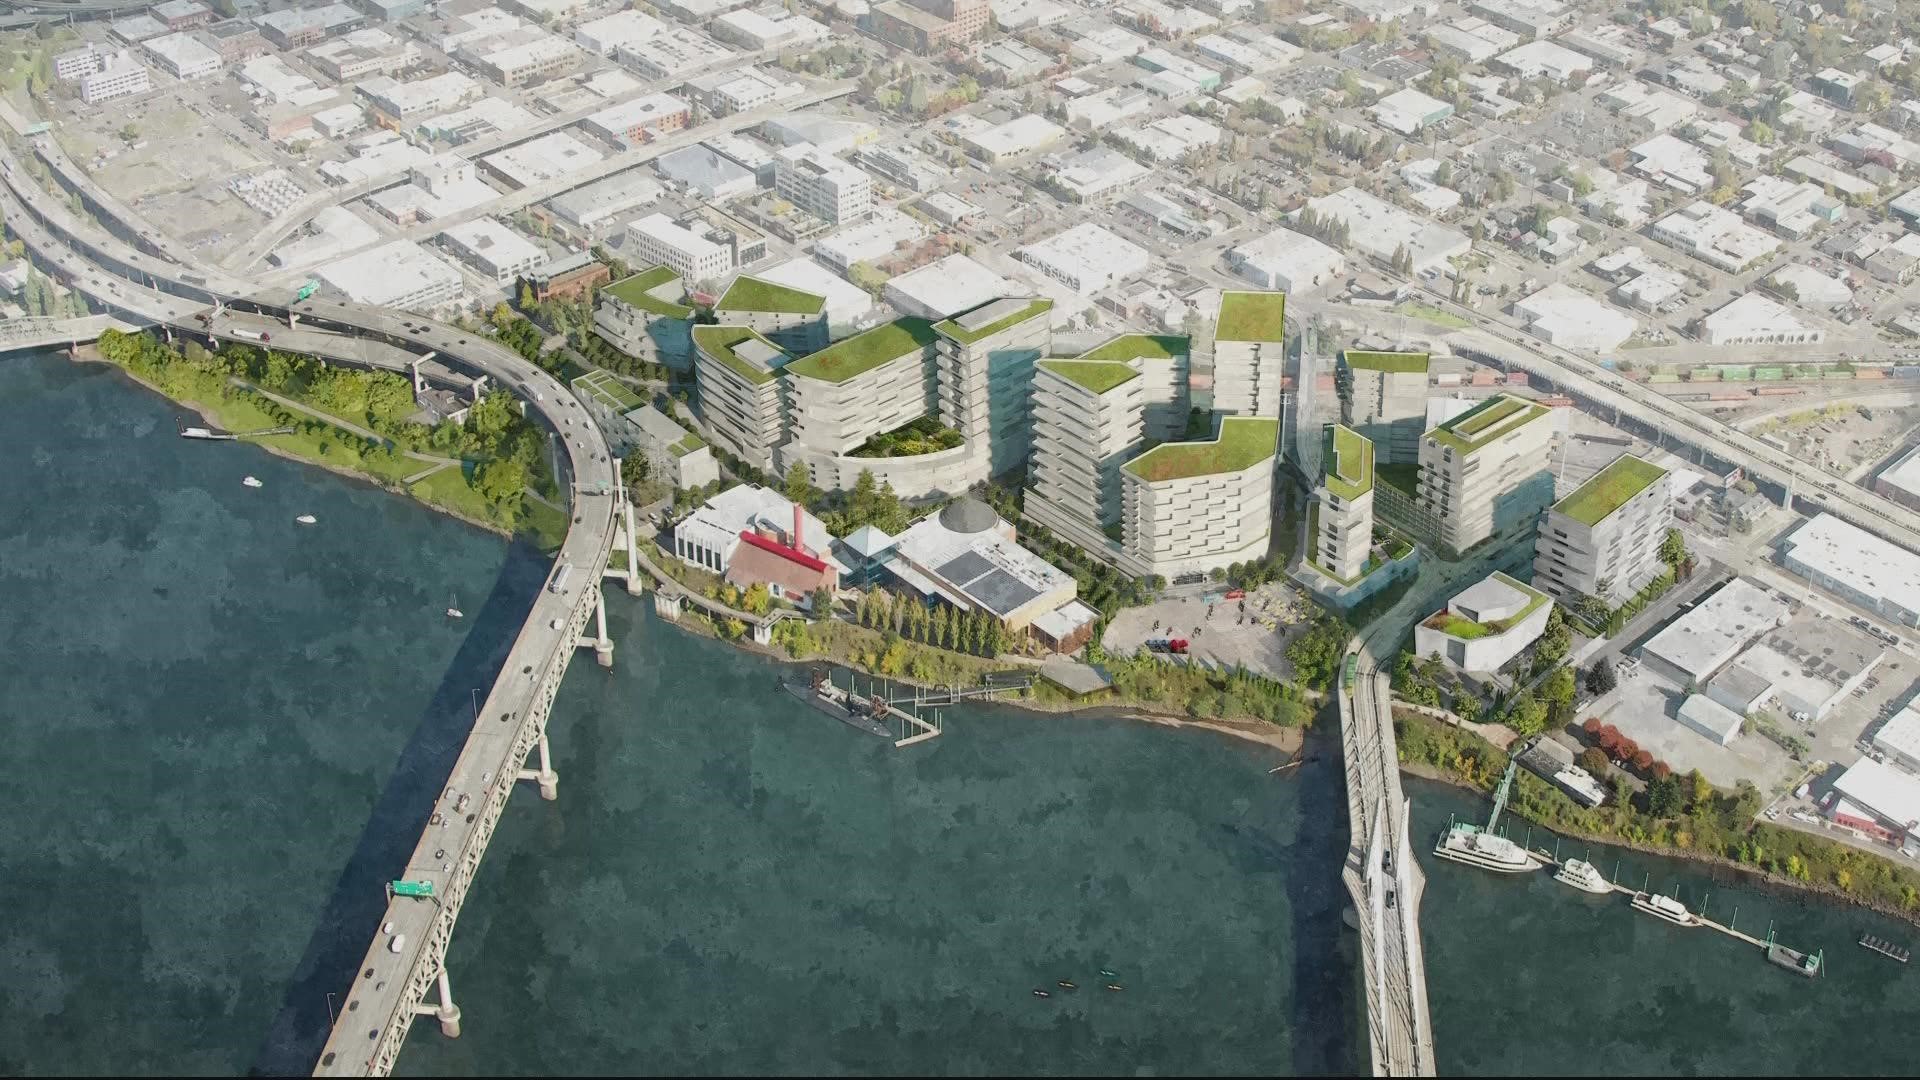 If given the green light, the OMSI project will bring jobs and affordable housing along the Willamette River.